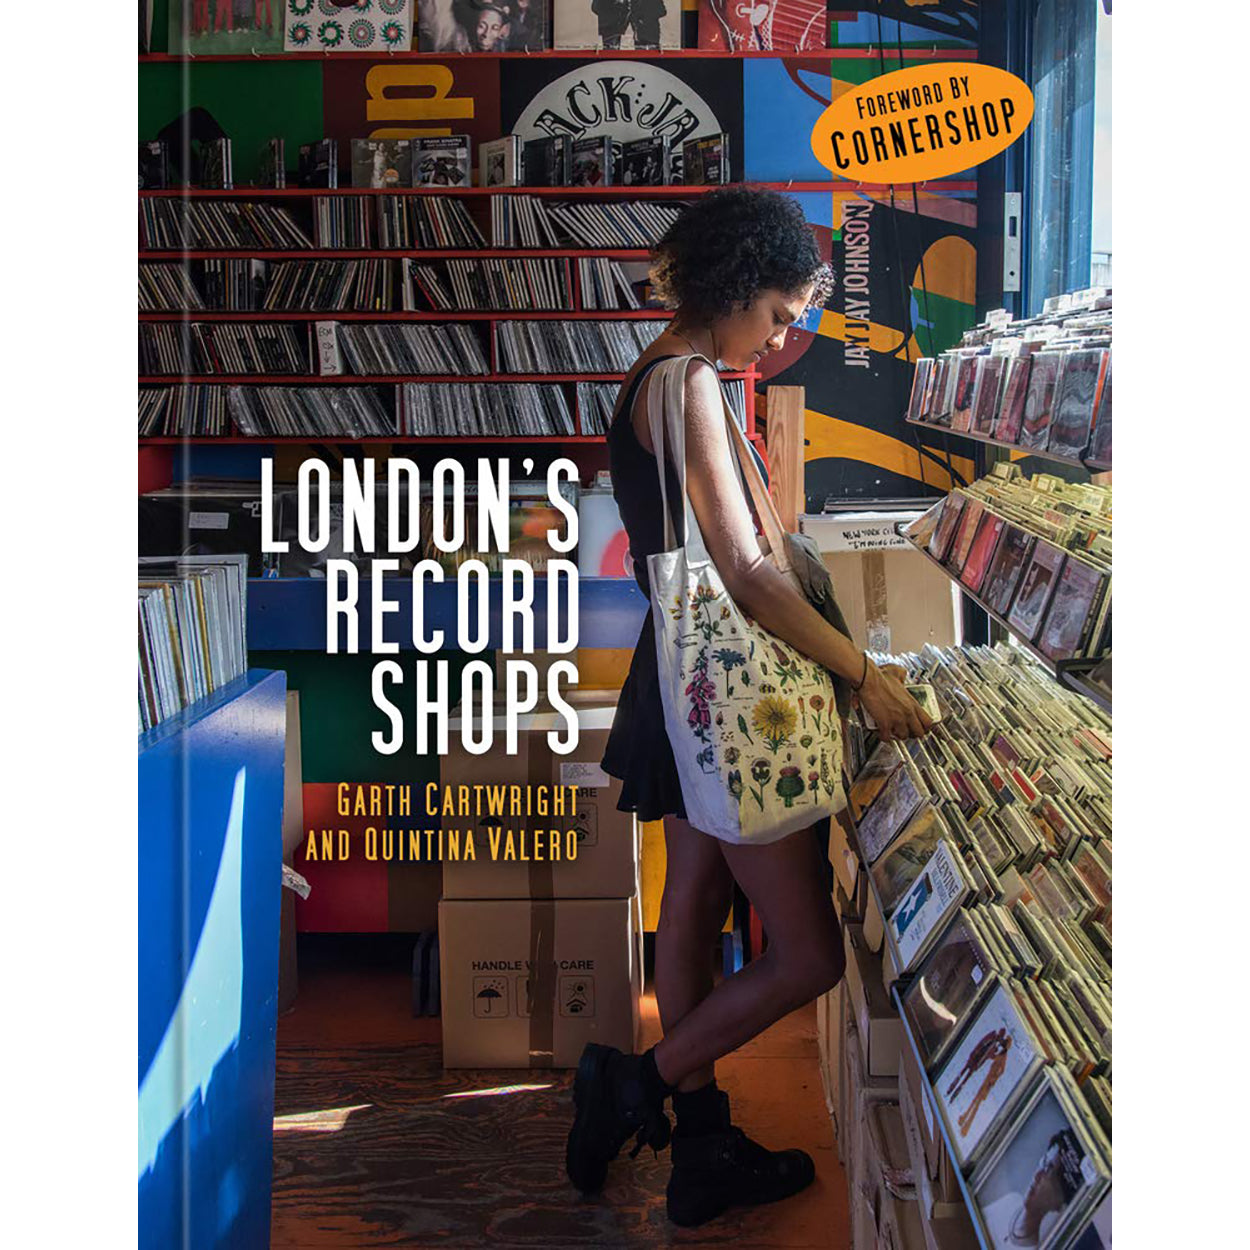 London's Record Shops Front Cover (Hardback)